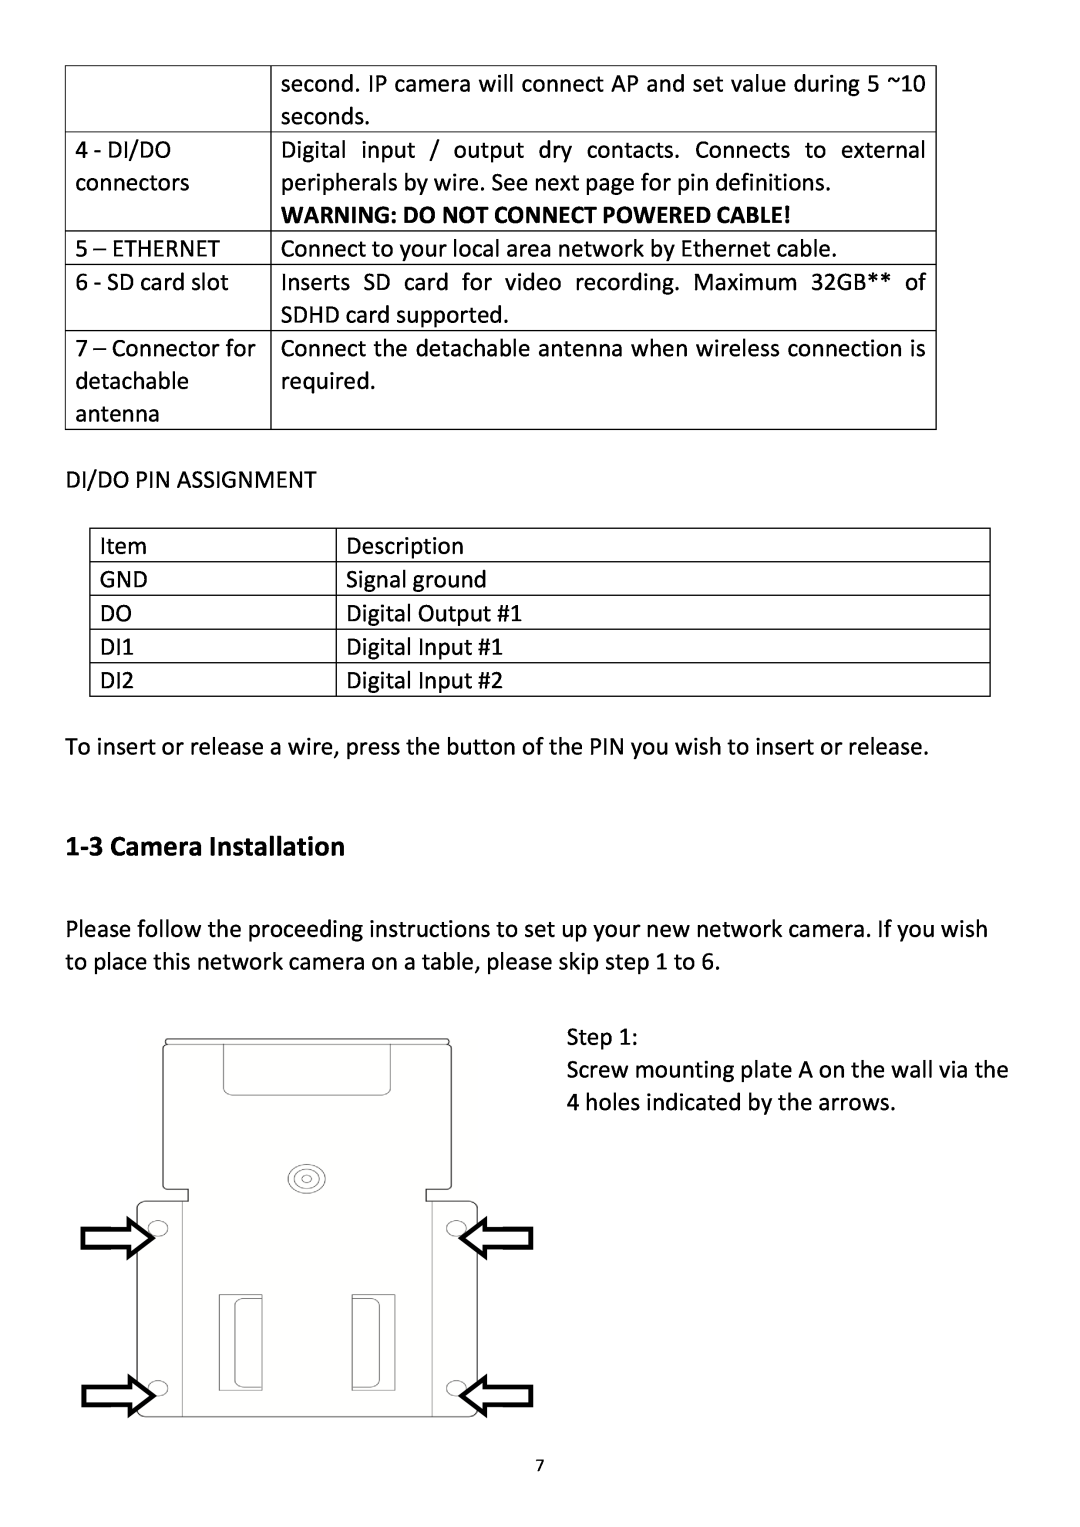 Edimax Technology PT-31W user manual 1-3Camera Installation, Warning: Do Not Connect Powered Cable 